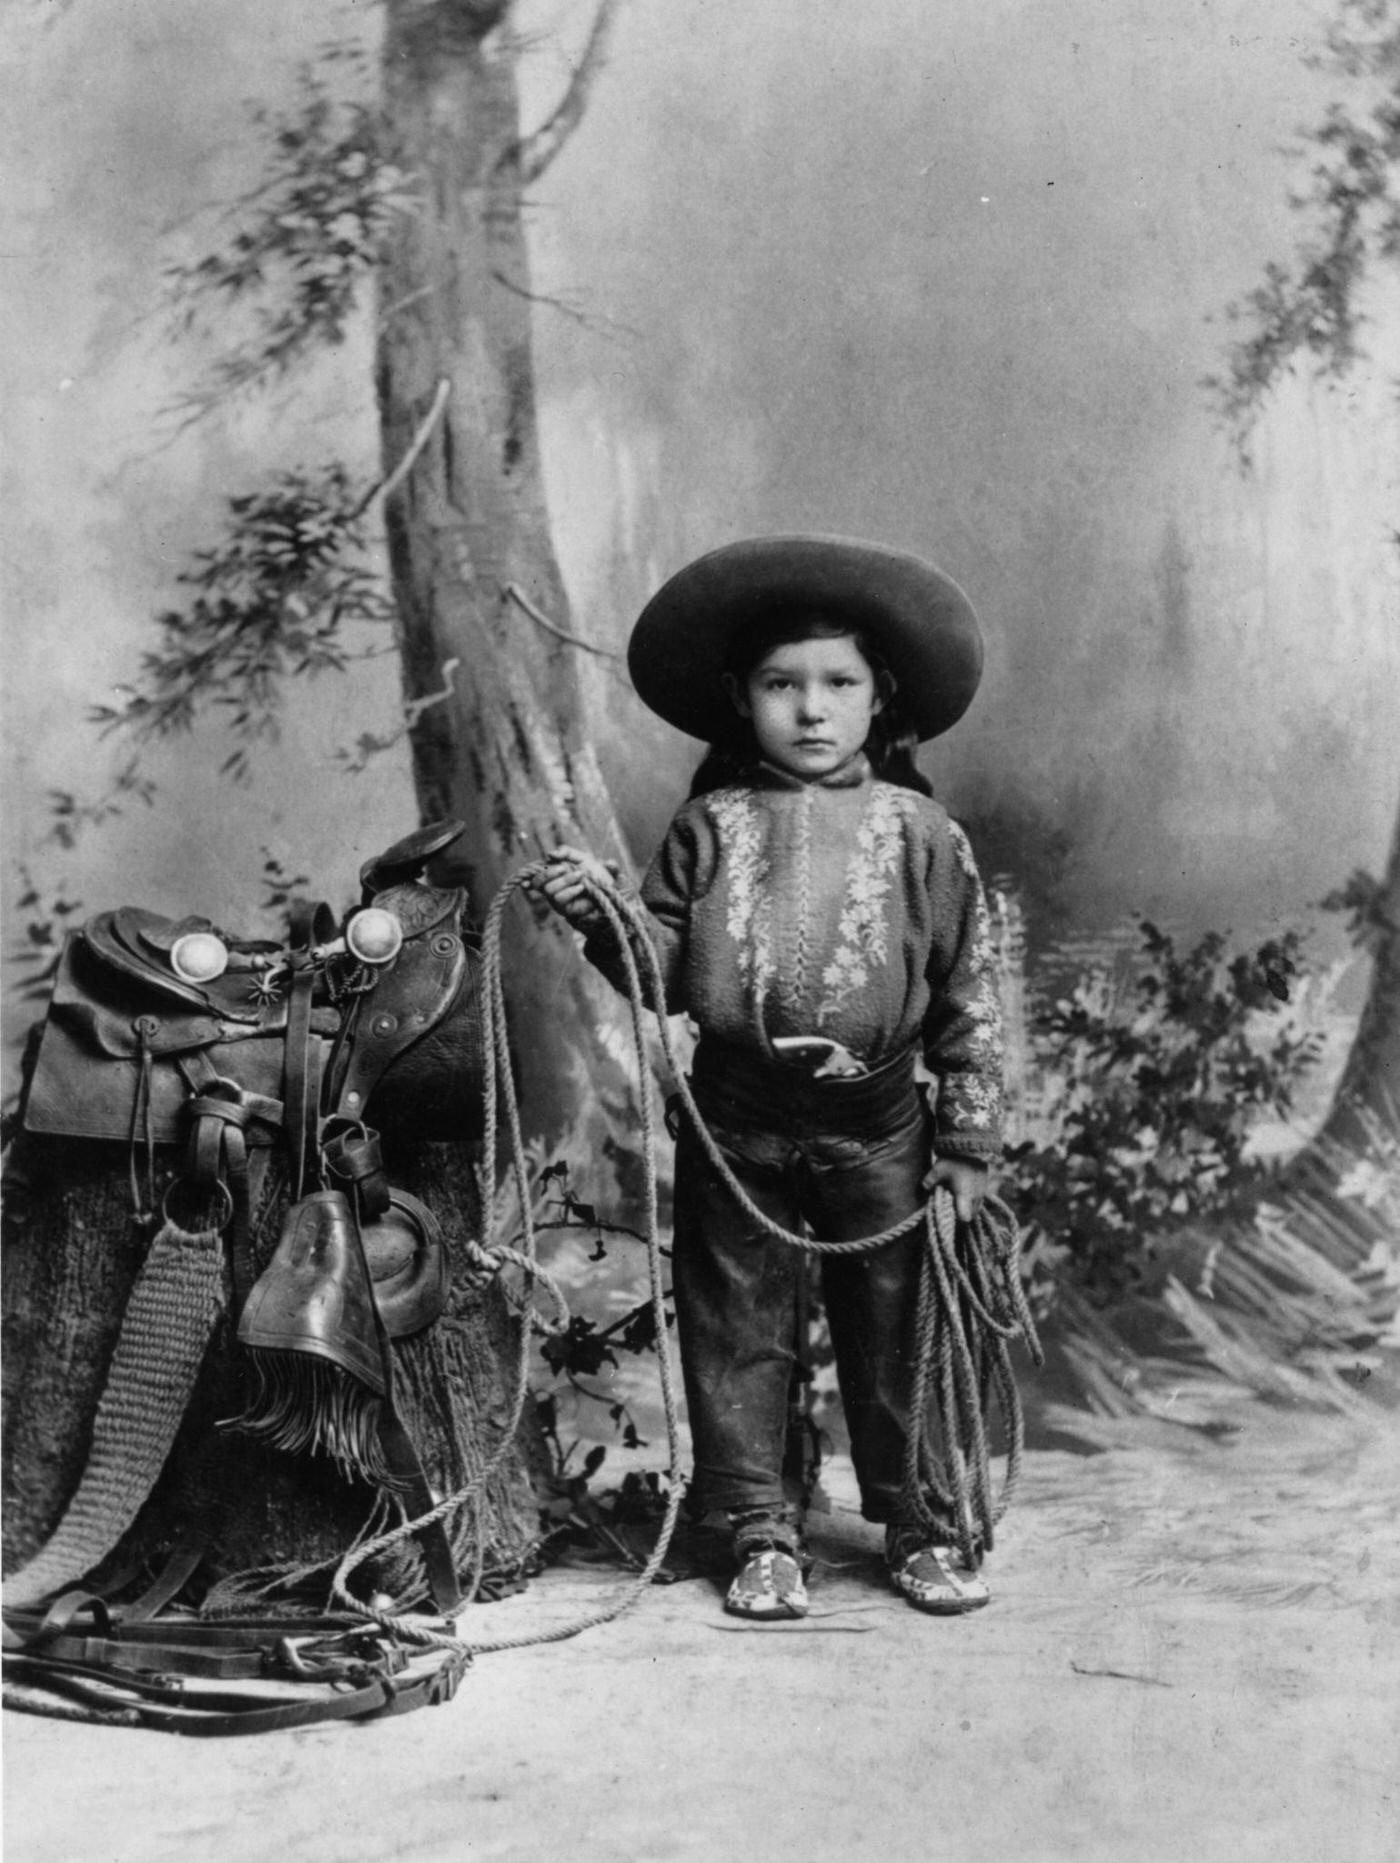 A young cowboy, circa 1890: A young member of Buffalo Bill's Wild West Show.